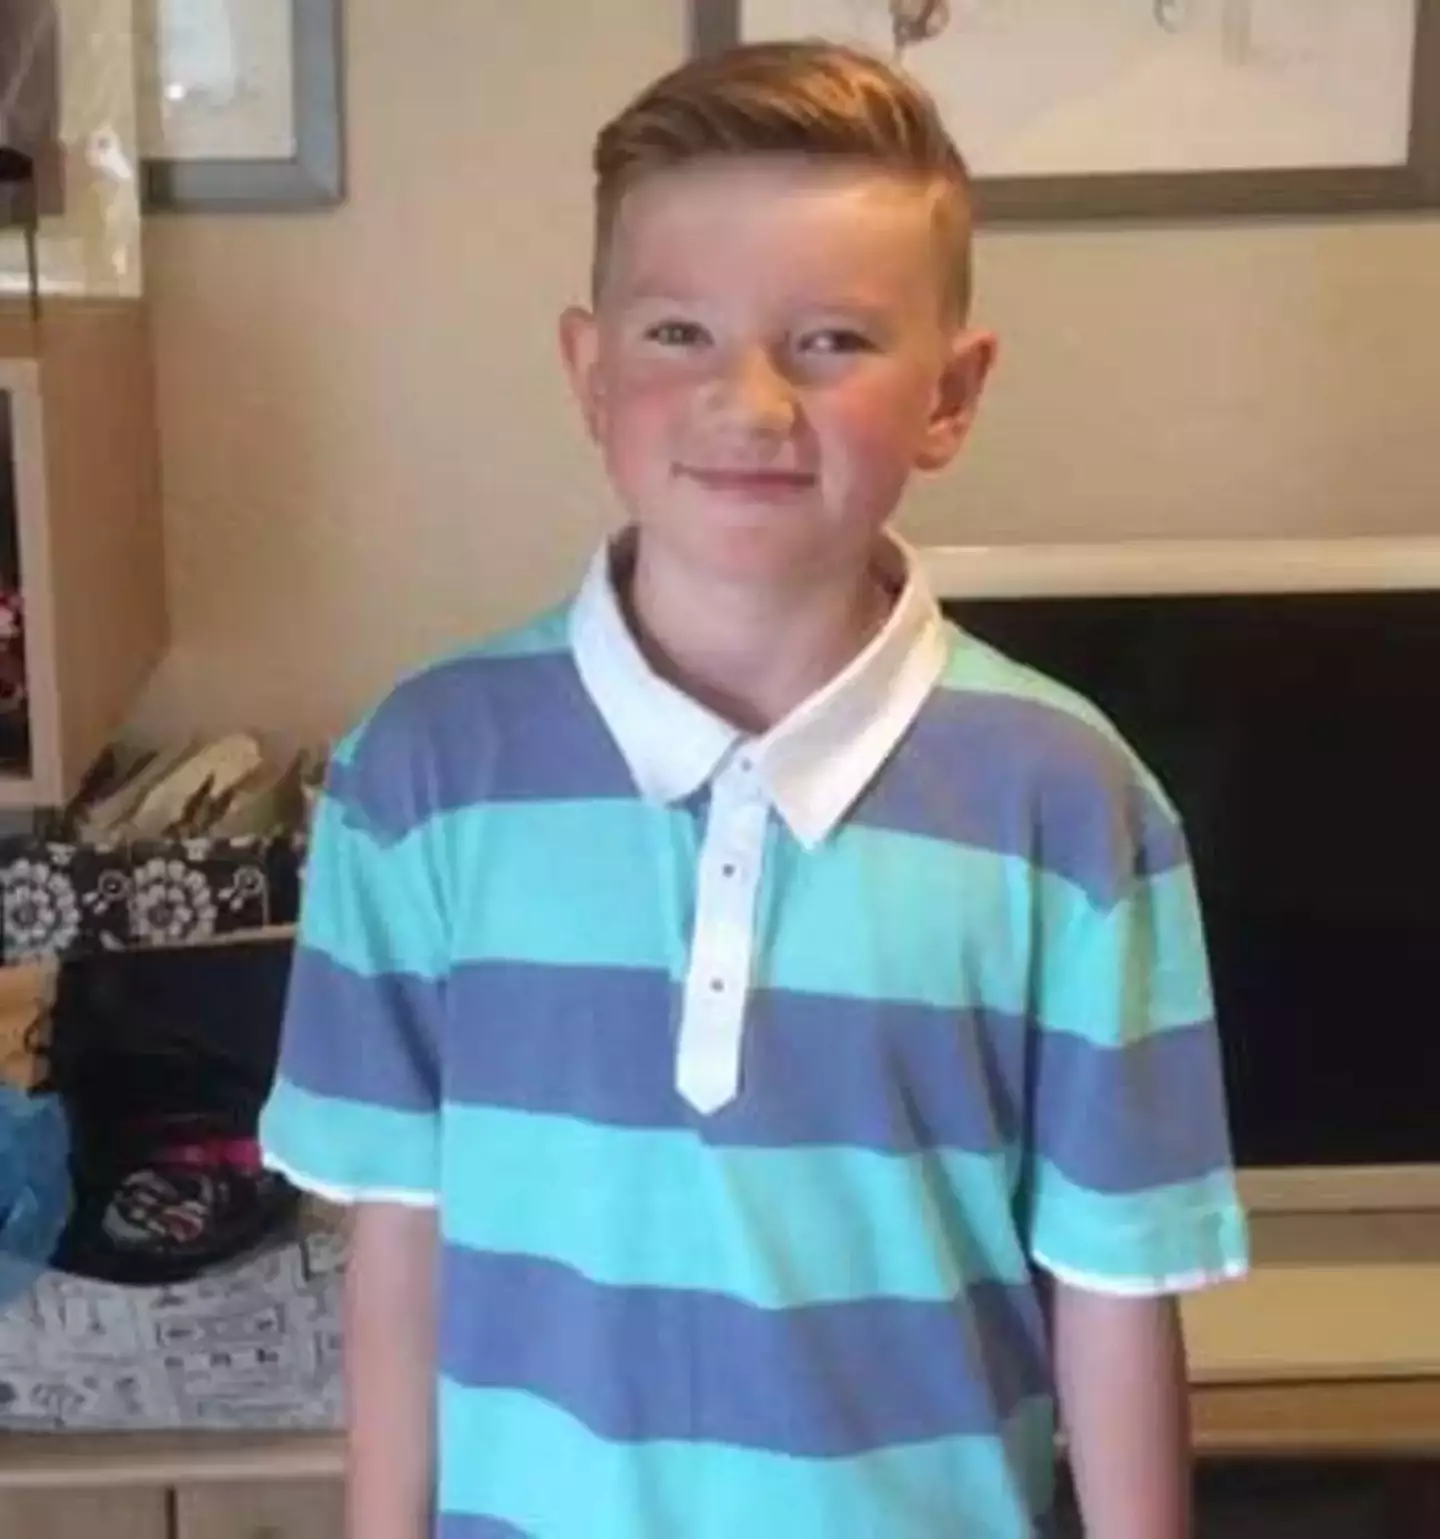 Alex Batty was just 11 when he went missing in Oldham.